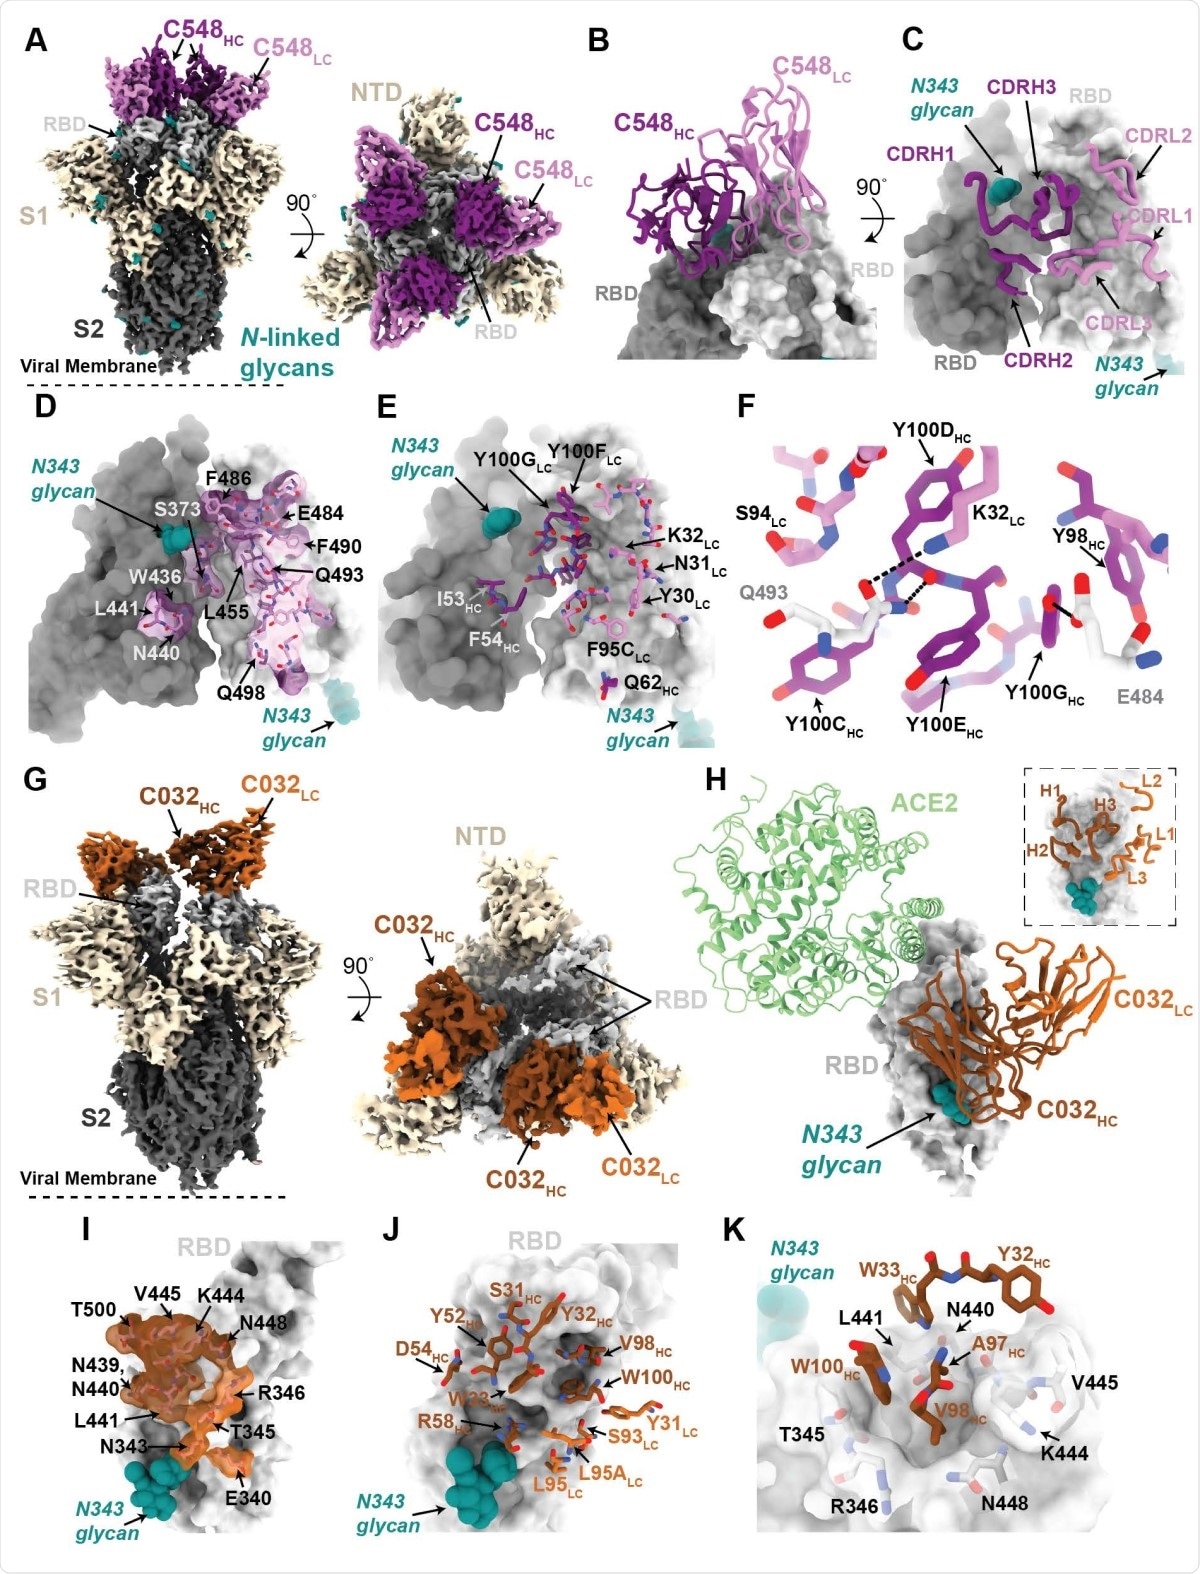 Structures of class 2 and class 3 anti-RBD 1.3m antibodies. (A) 3.4 Å cryo-EM density for class 2 C548-S complex (only the VH-VL domains of C548 are shown). (B) Close-up view of quaternary epitope involving bridging interactions between adjacent RBDs. (C) CDR loops mapped onto adjacent RBD surfaces. (D) Epitope of C548 highlighted on adjacent RBDs. (E) C548 paratope mapped onto adjacent RBDs. (F) Interactions between RBD and C548 with a subset of interacting residues highlighted as sticks. Potential hydrogen bonds shown as dotted lines. (G) 3.4 Å cryo-EM density for class 3 C032-S complex (only the VH-VL domains of C032 are shown). (H) Overlay of C032–RBD portion of the C032-S complex structure with an ACE2-RBD structure (from PDB 6VW1). (I) Epitope of C032 highlighted on the RBD surface. (J) C032 paratope mapped onto RBD surface. (K) Interactions between RBD and C032 CDRH1 and CDRH3 loops, with a subset of interacting residues highlighted as sticks. Potential hydrogen bonds shown as dotted lines.